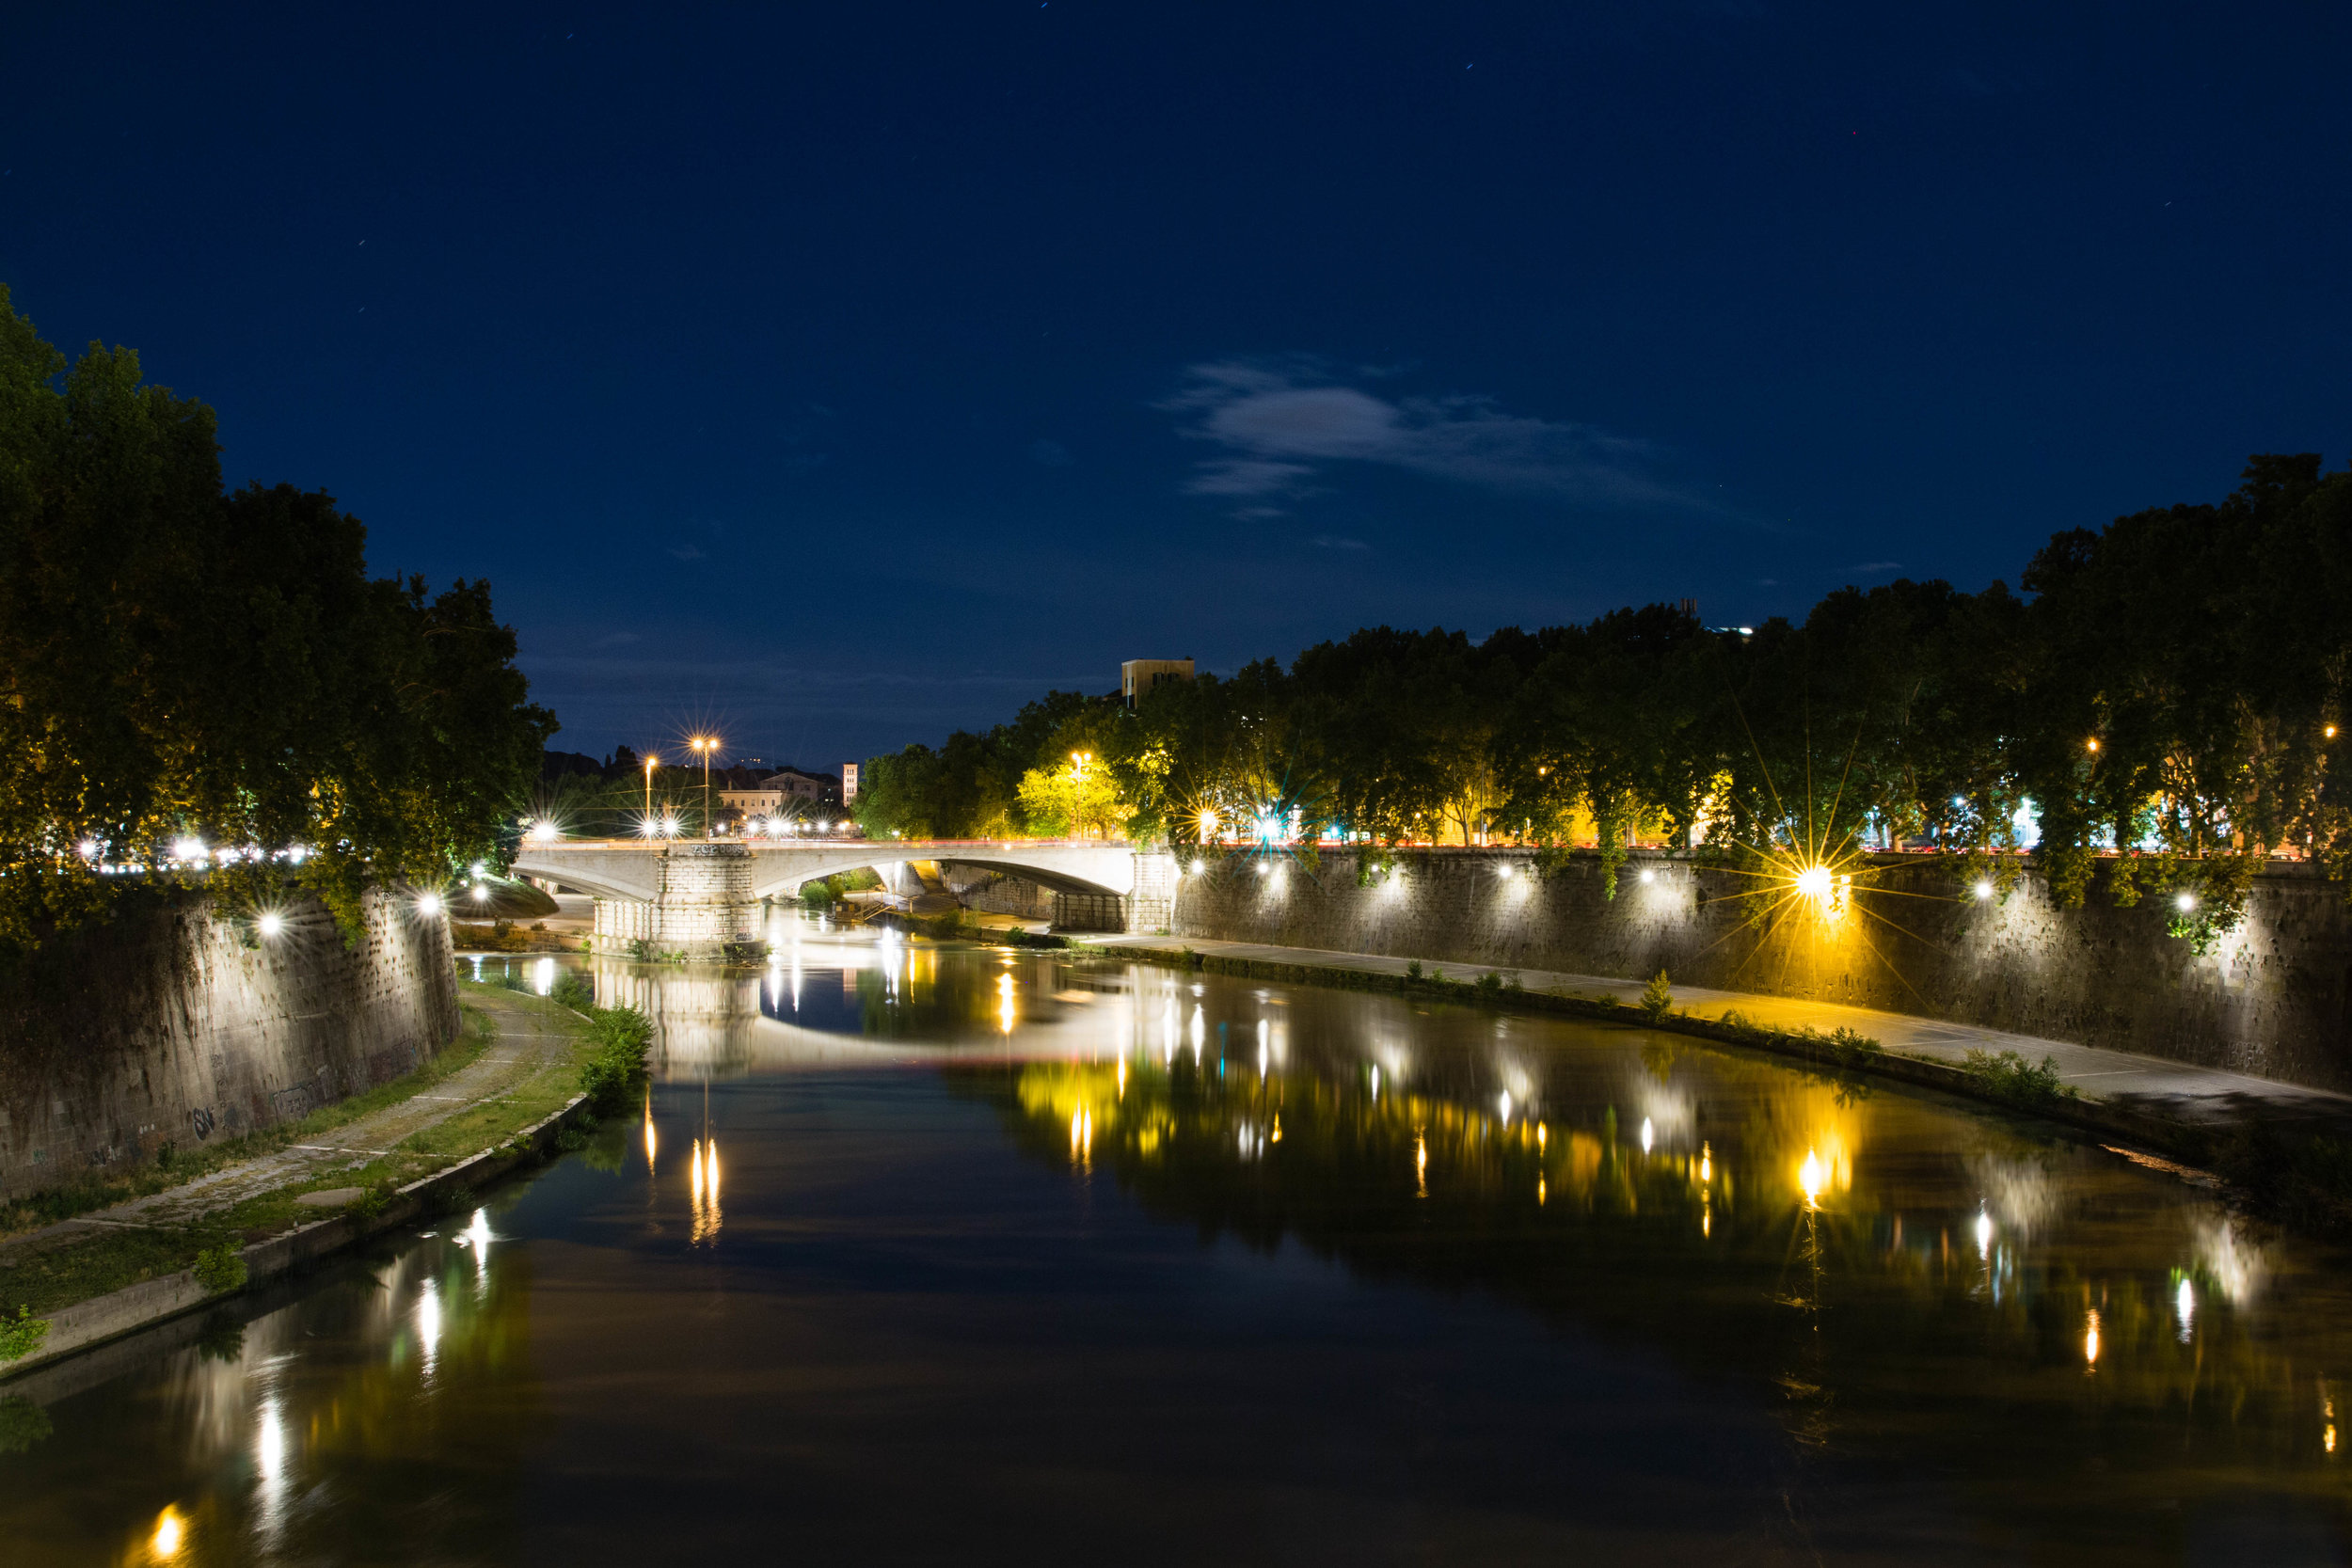 Night Photography from the Tiber River